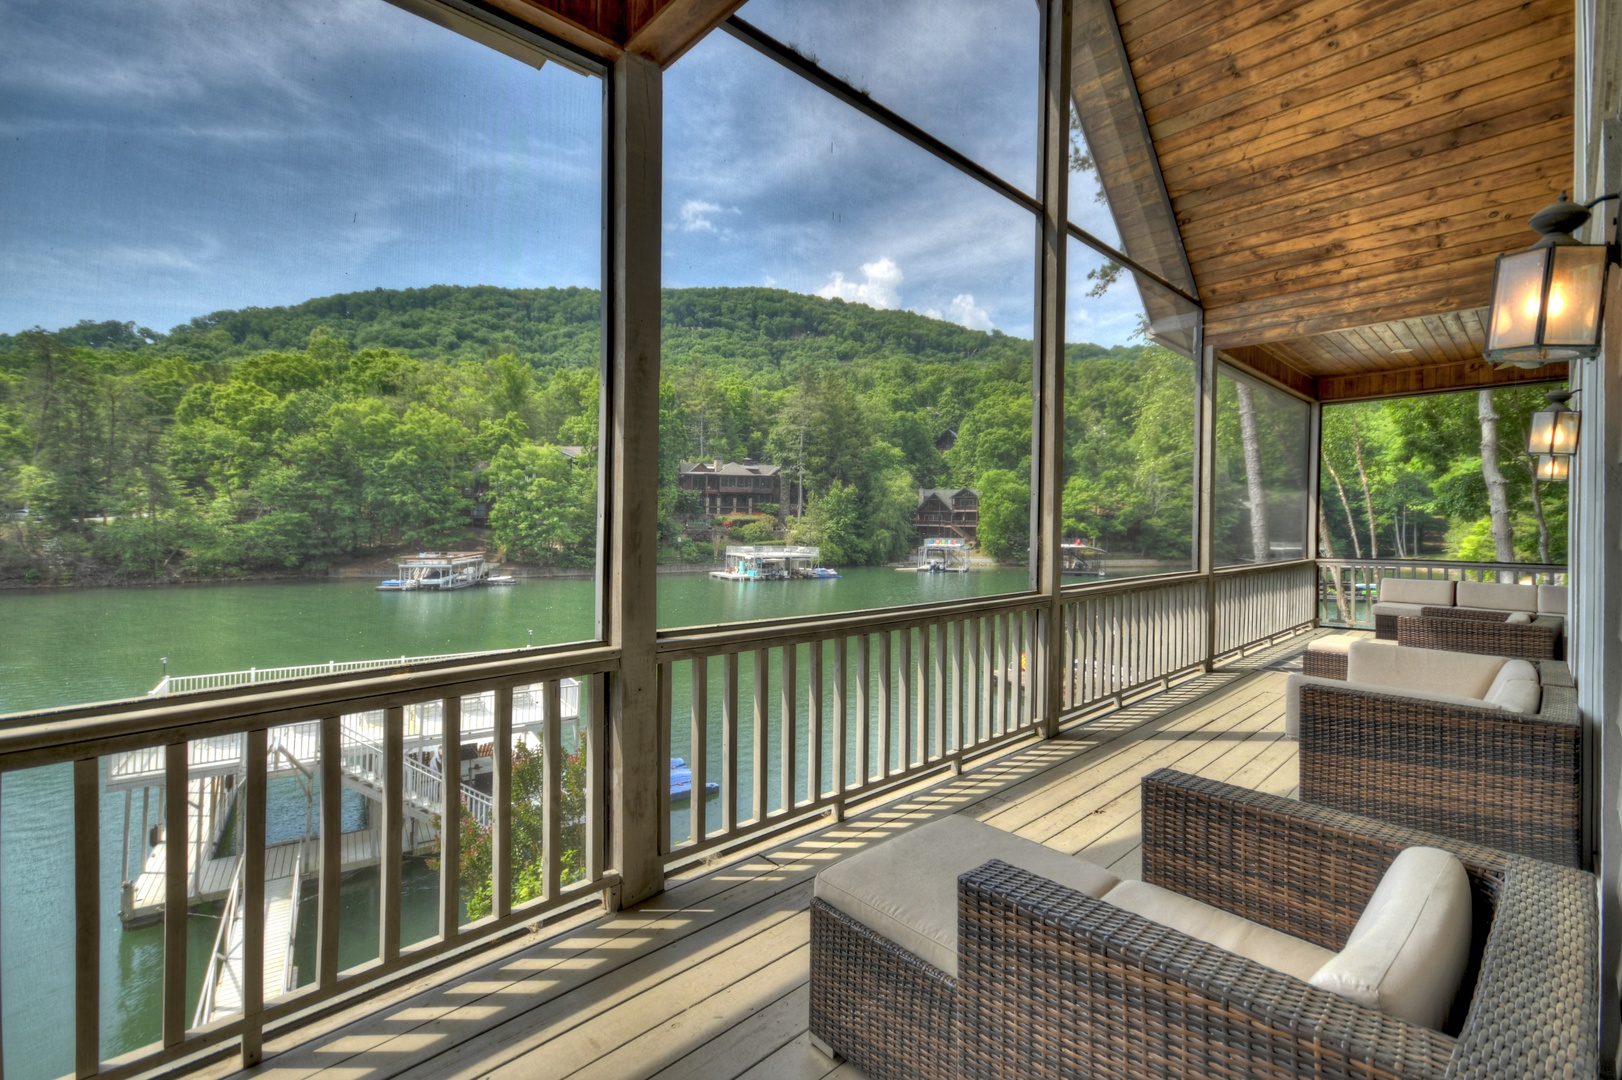 Jump Right In- Main level deck with outdoor seating overlooking the lake